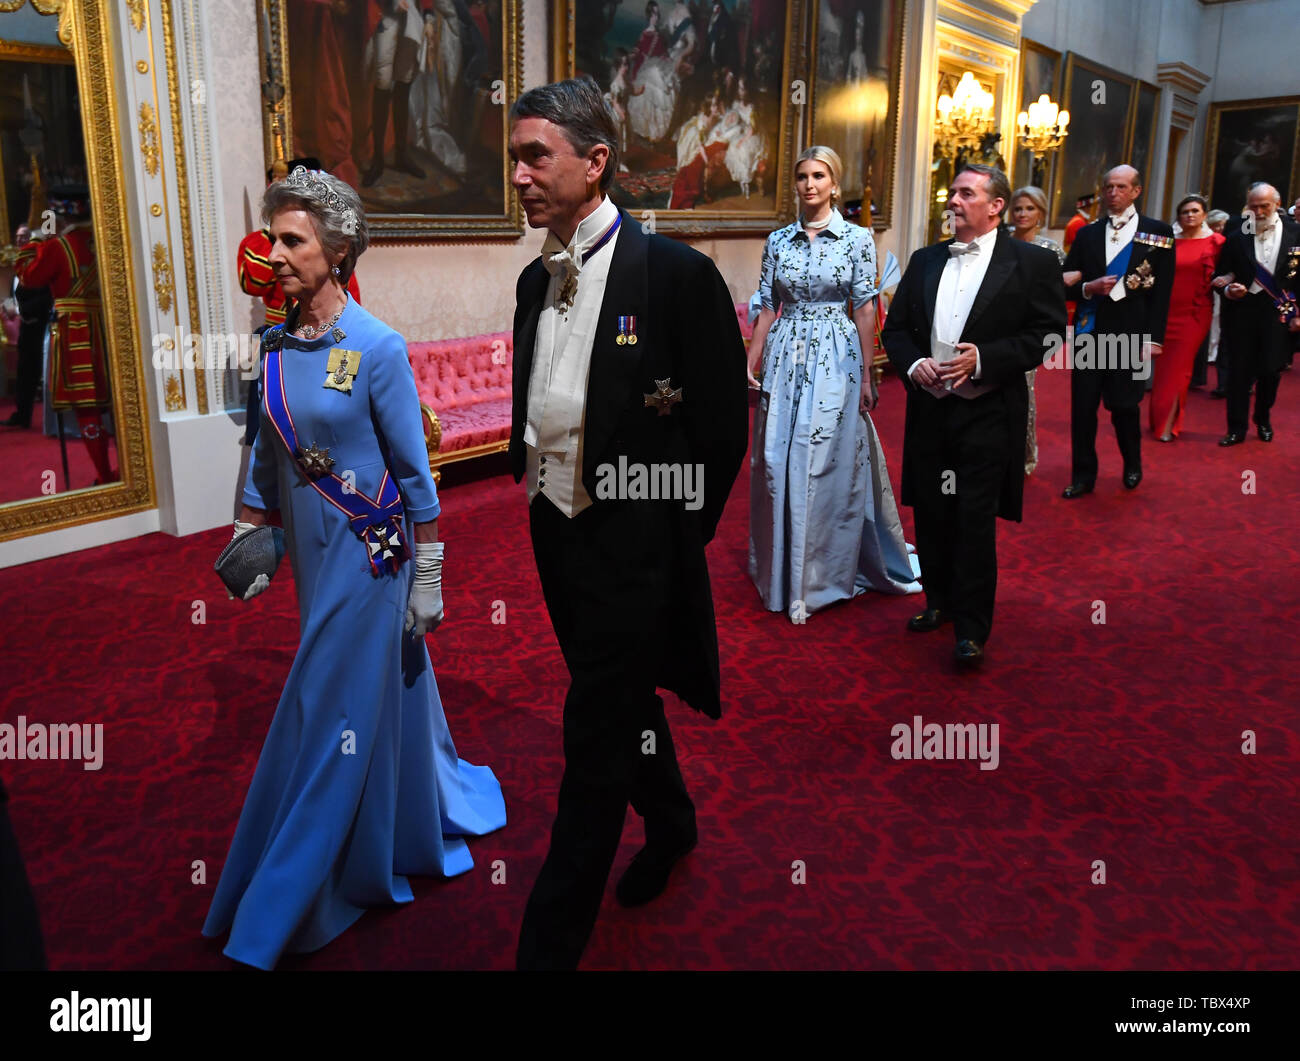 The Duchess of Gloucester and the Lord Great Chamberlain arrive through the East Gallery during the State Banquet at Buckingham Palace, London, on day one of the US President's three day state visit to the UK. Stock Photo